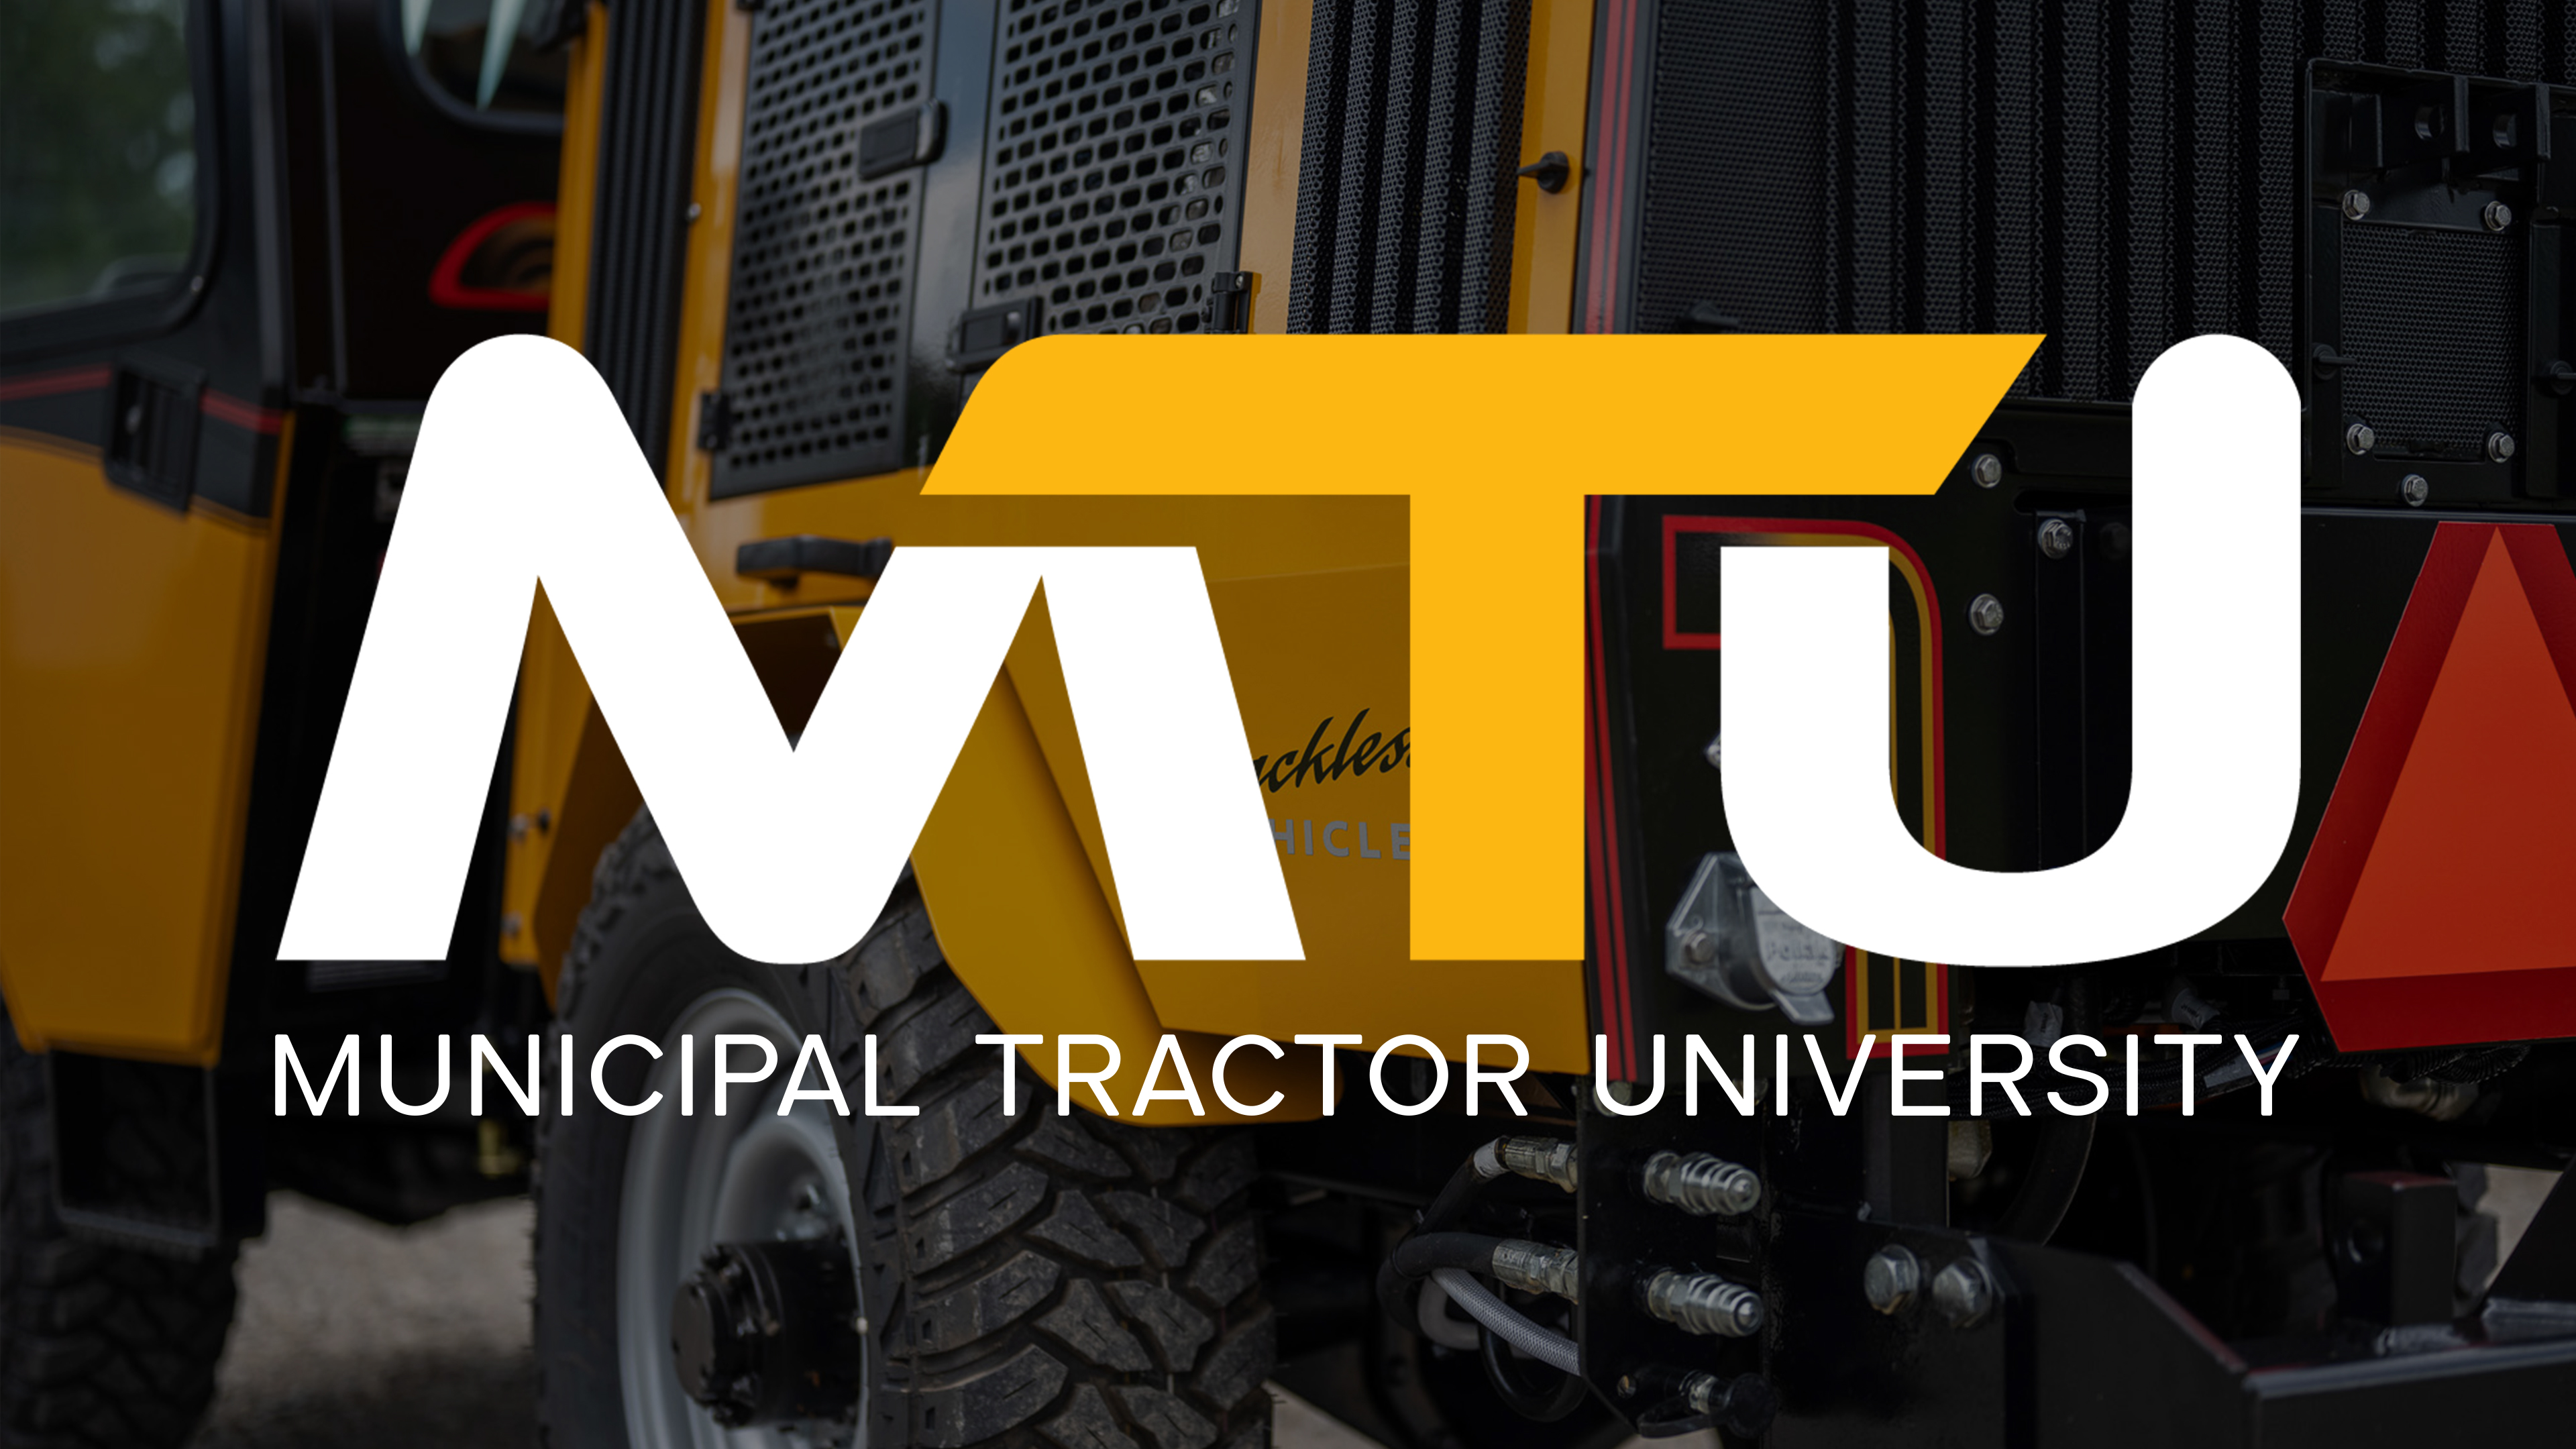 Municipal Tractor University logo overlayed over an image of the Trackless MT